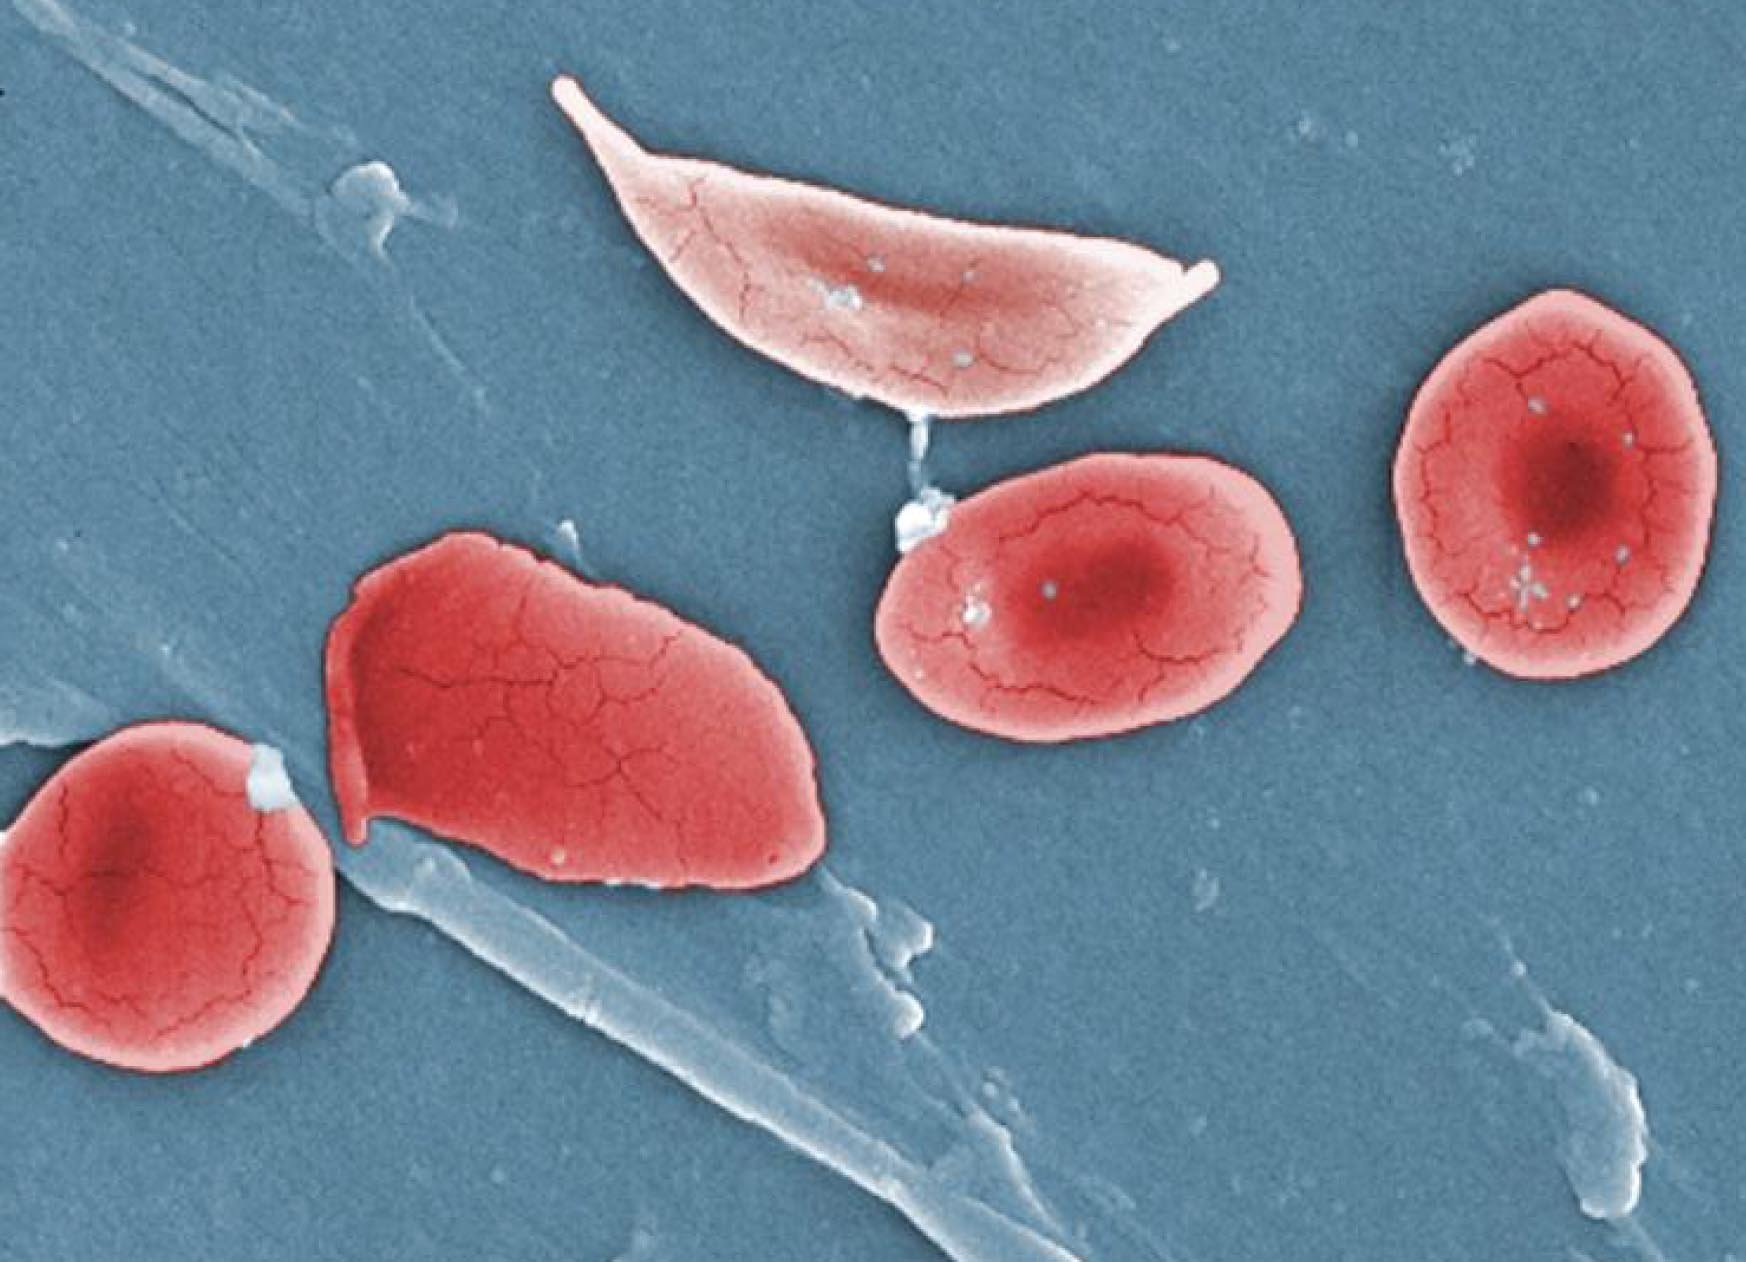 In sickle cell disease, the red blood cells are misshapen and don't carry oxygen well. Image credit - OpenStax College licensed under CC BY 3.0